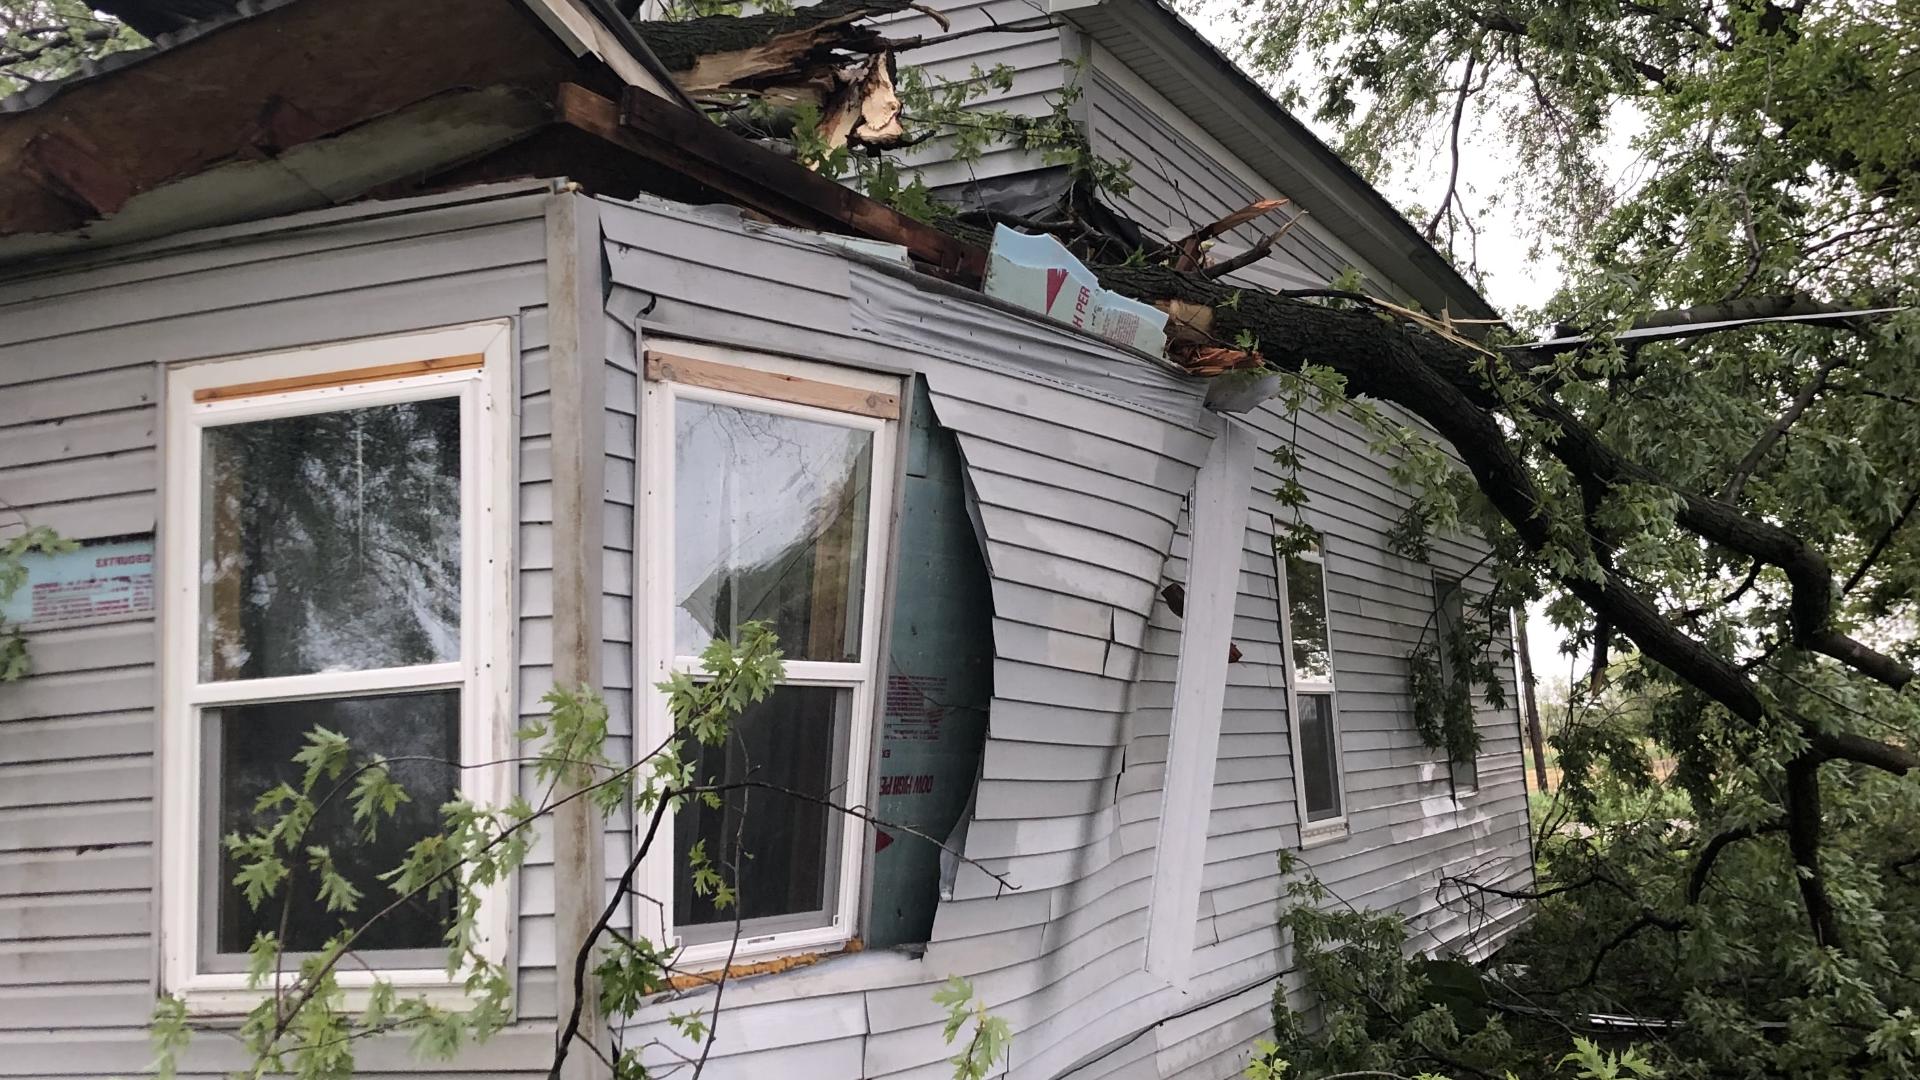 Keith and Emily Scheelhaase, along with their daughters, were fast asleep Tuesday night when severe weather struck.